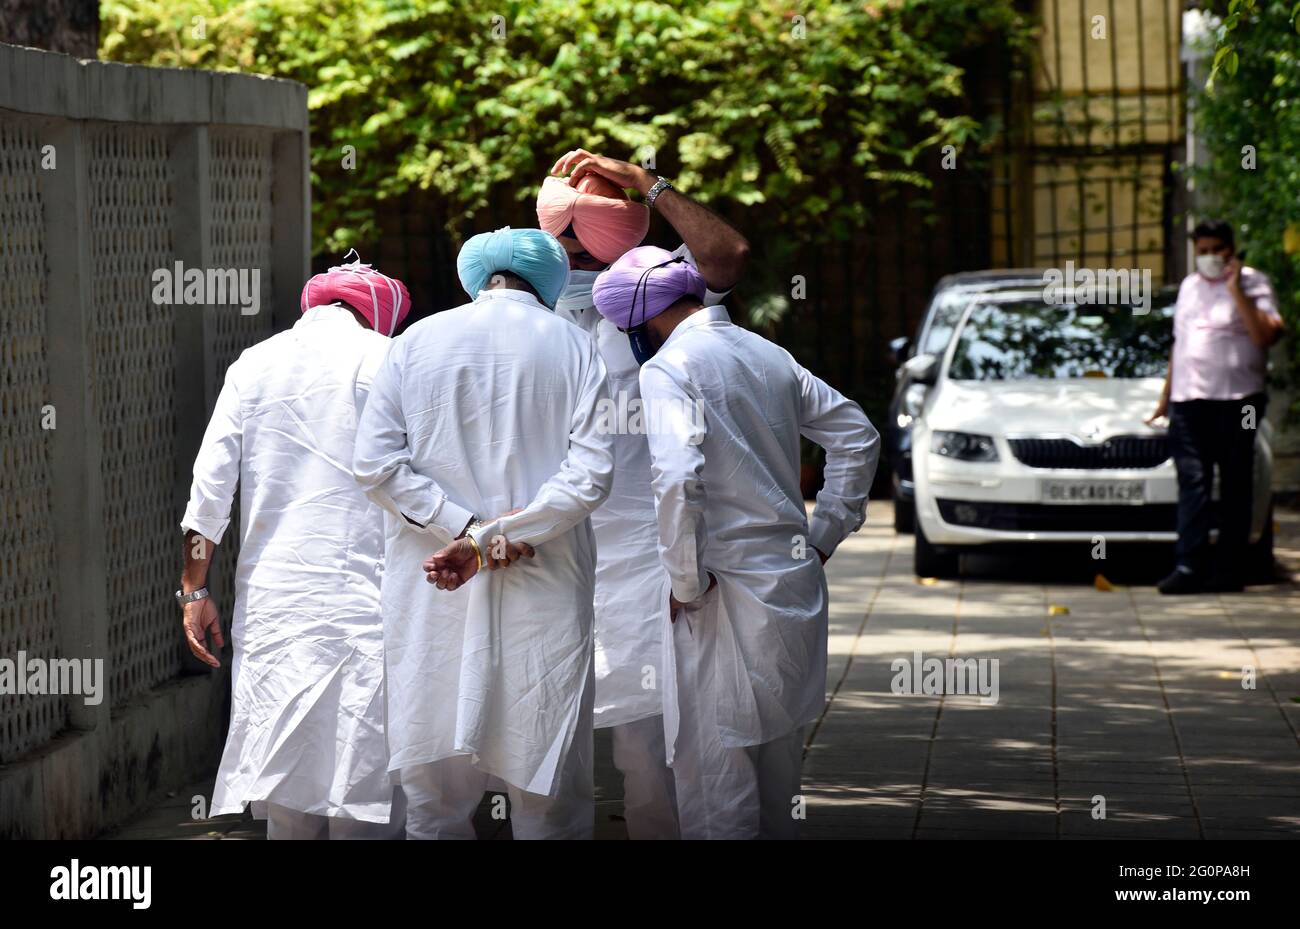 New Delhi, India. 02nd June, 2021. NEW DELHI, INDIA - JUNE 2: Balbir Singh Sidhu(2L), Health Minister Punjab with other MLAs leave after the meeting with a party panel at Gurudwara Rakab Ganj Road, on June 2, 2021 in New Delhi, India. Three member committee headed by Rajya Sabha MP Mallikarjun Kharge had one-on-one meetings with the leaders to hear their grievances and suggestions to find a solution to infighting. (Photo by Sanjeev Verma/Hindustan Times/Sipa USA) Credit: Sipa USA/Alamy Live News Stock Photo